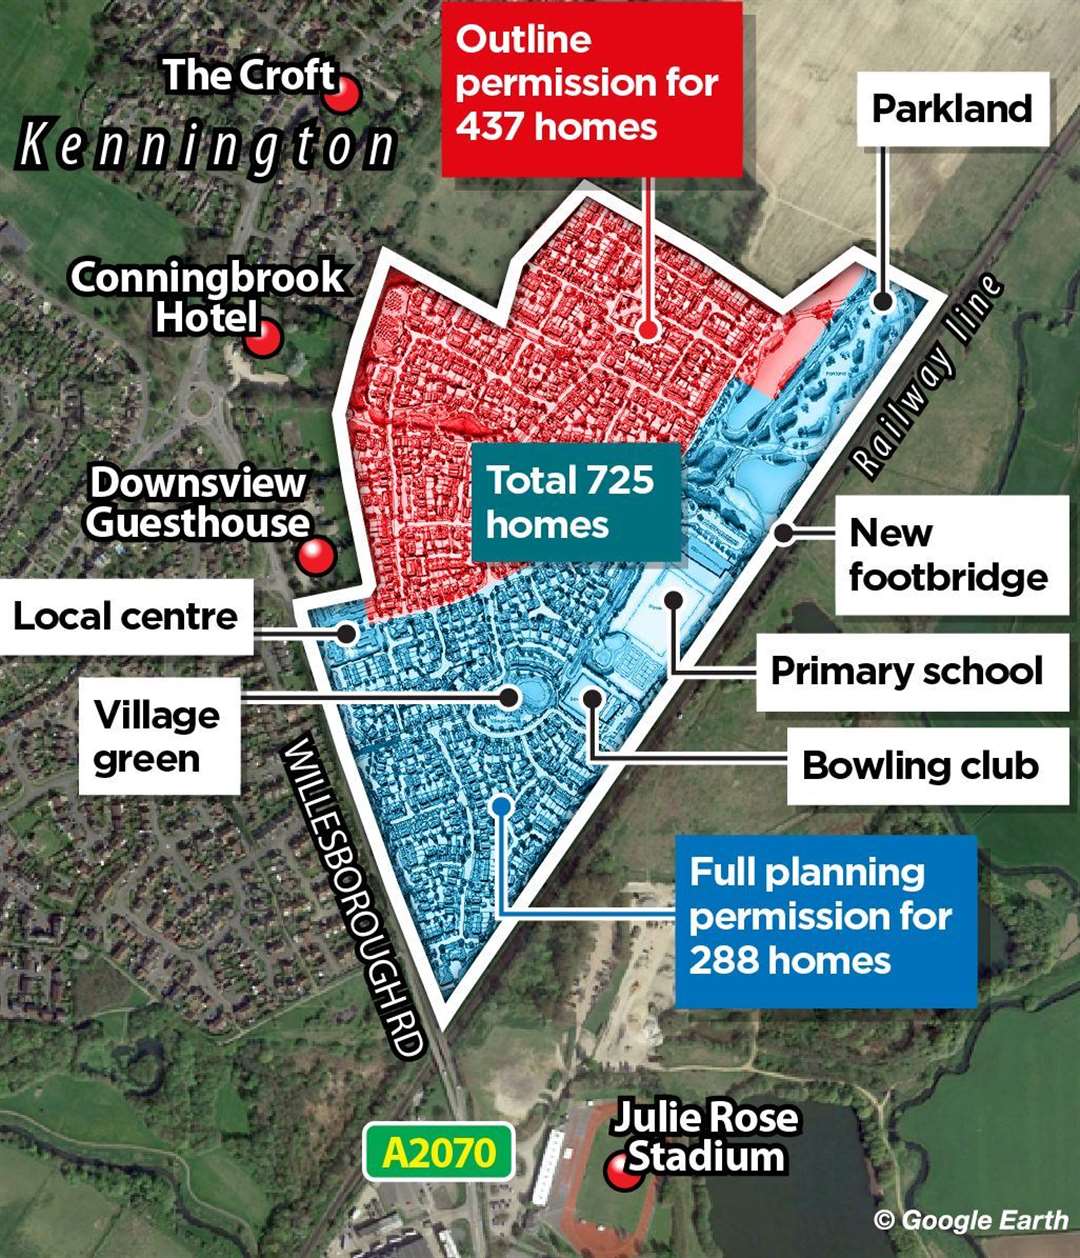 An overview of the Conningbrook Park site, showing which area has been fully approved and which has been allowed in principle